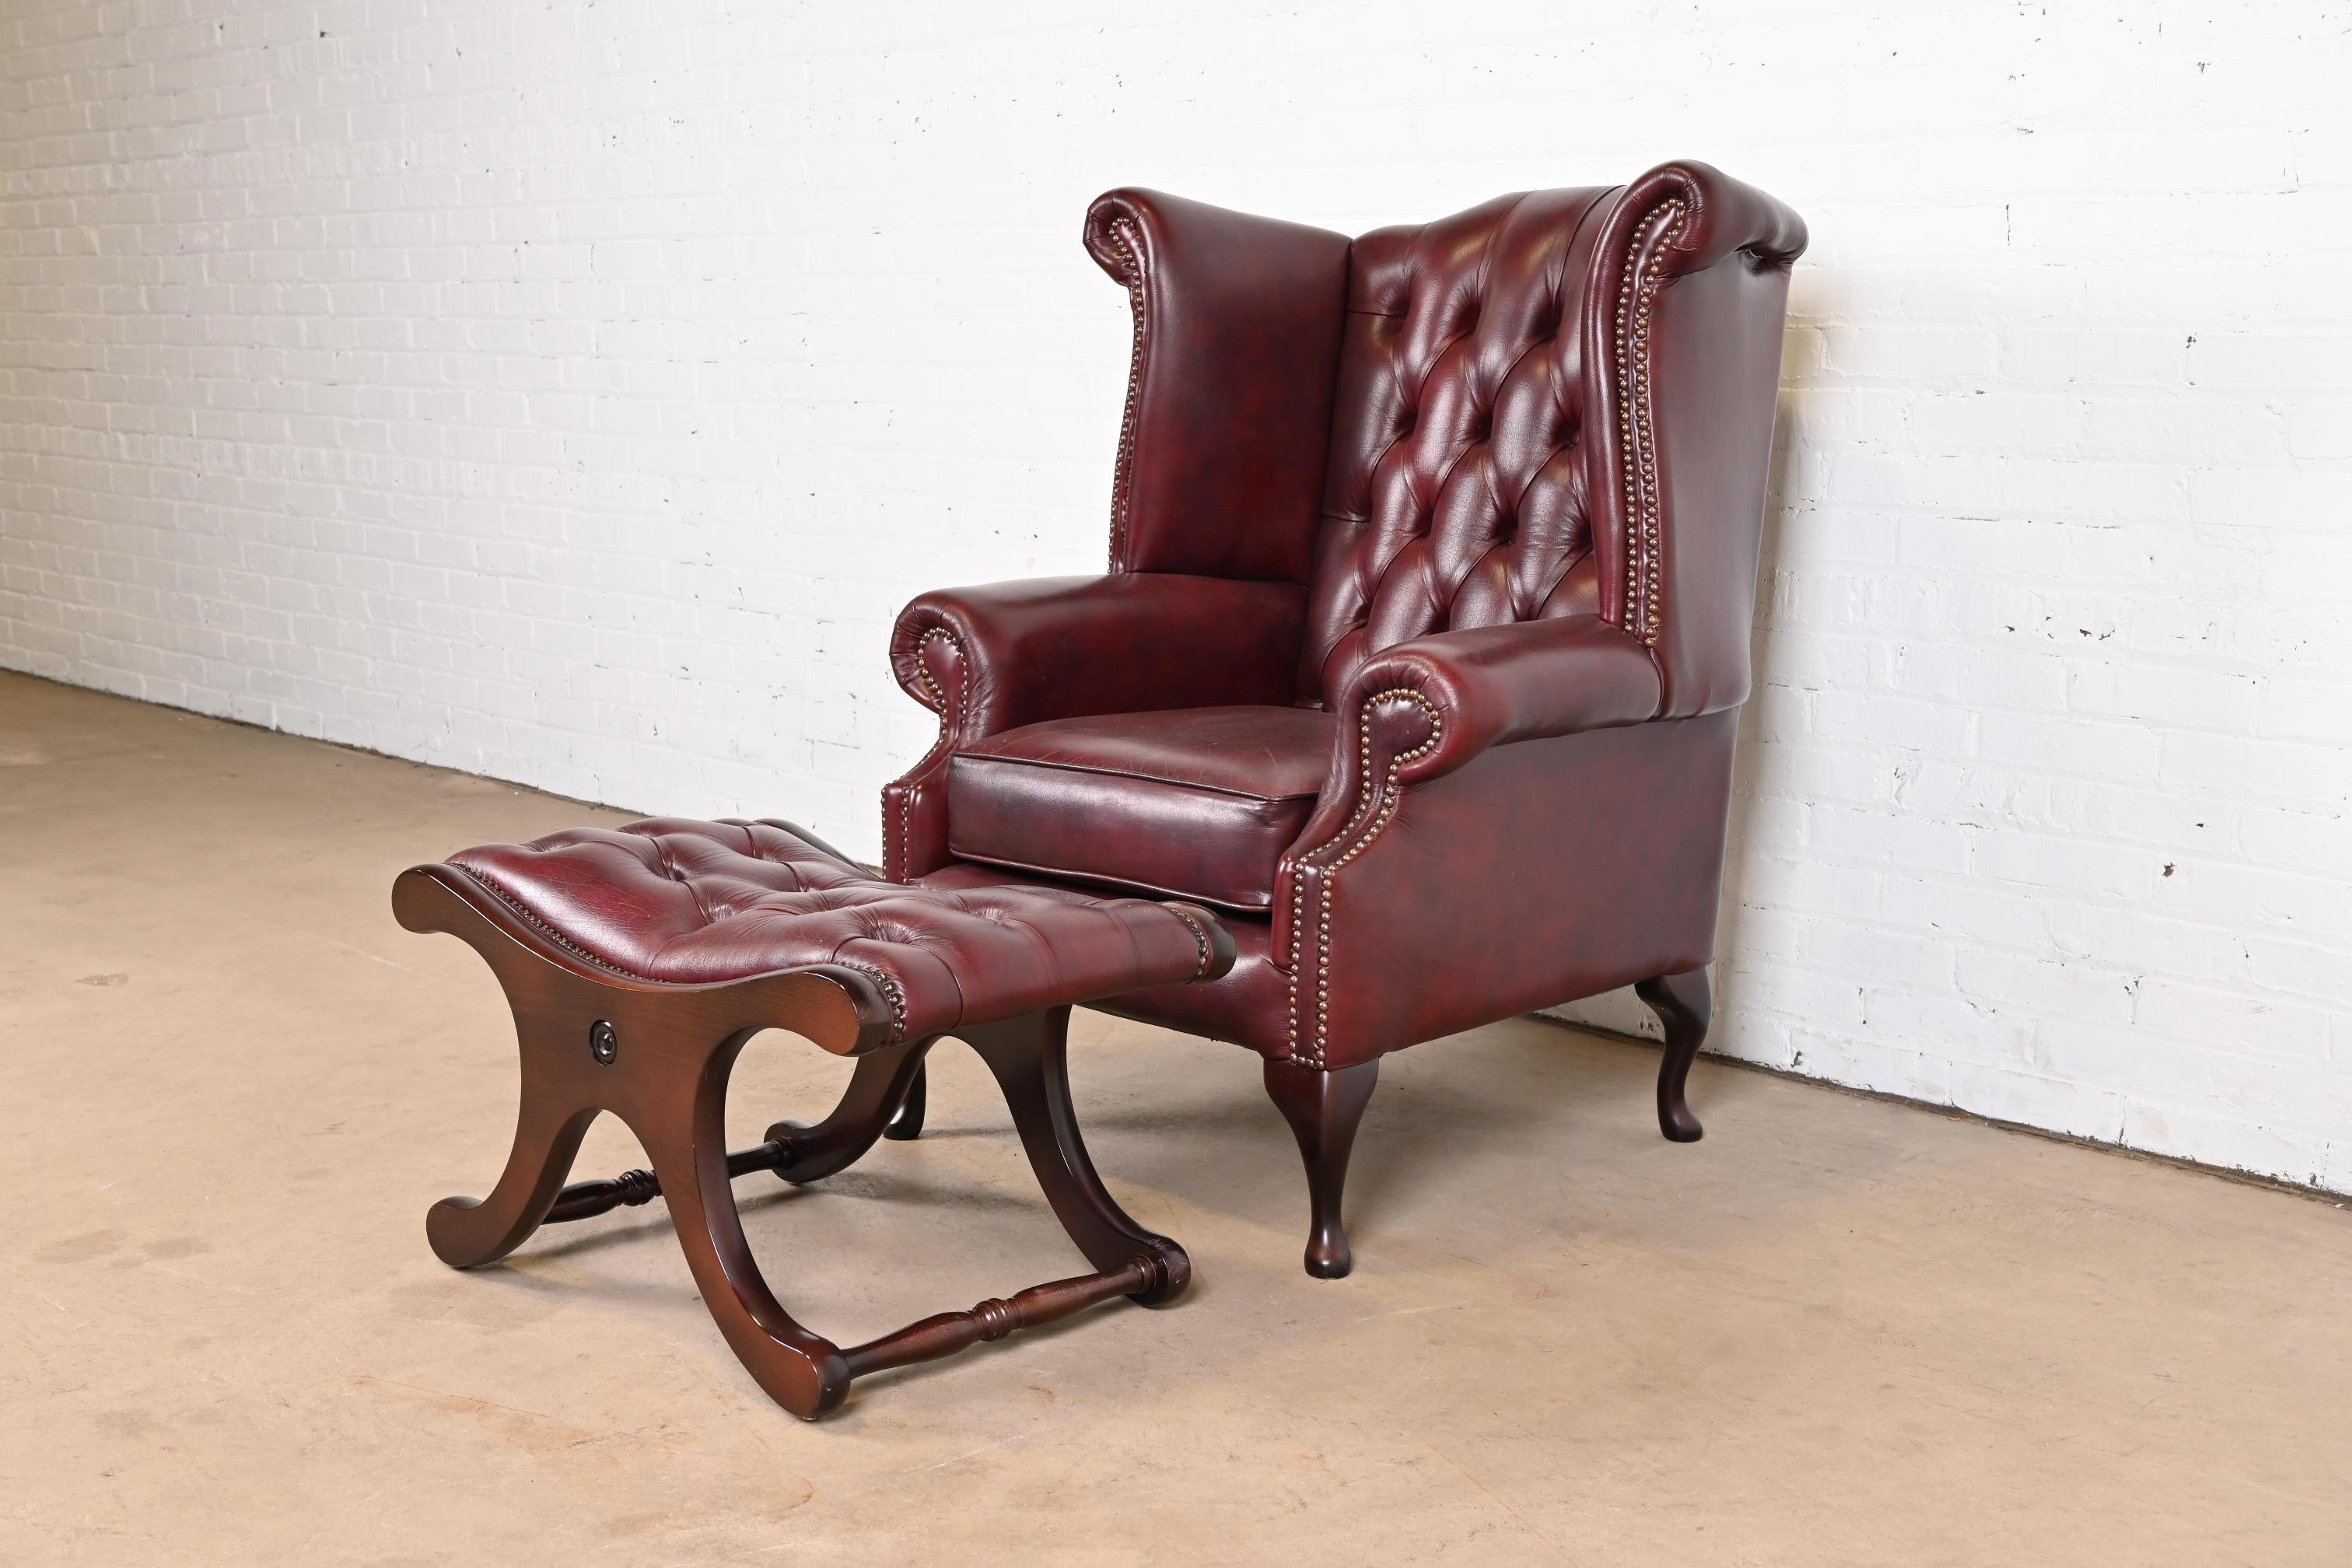 Brass Vintage English Oxblood Leather Chesterfield Wingback Lounge Chair with Ottoman